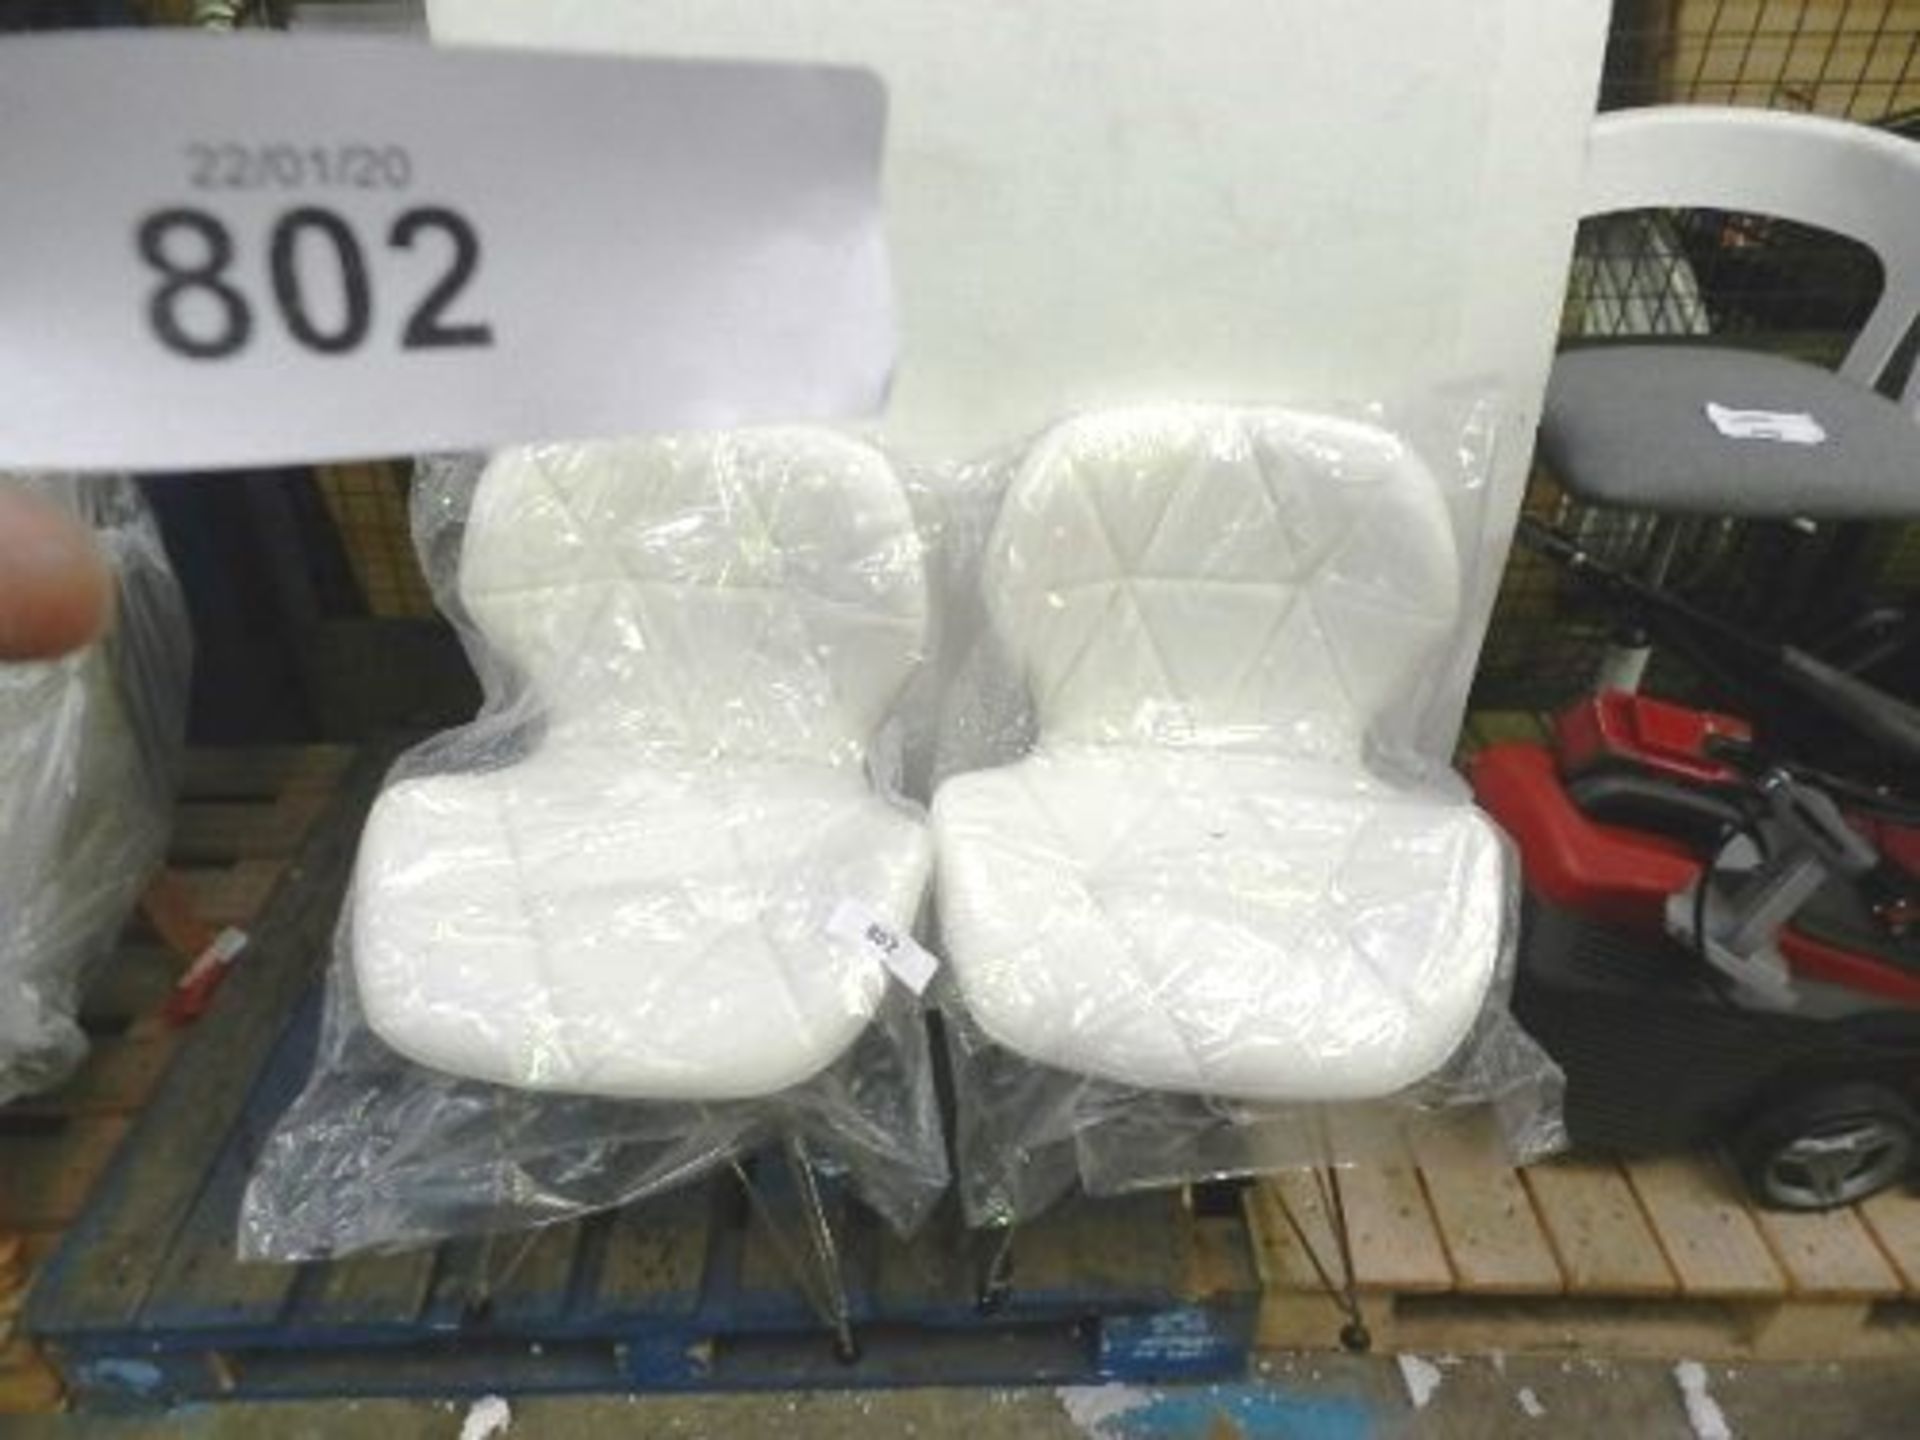 2 x white Charles Jacobs 1020-1 PU WHT chairs - New (GSF34)